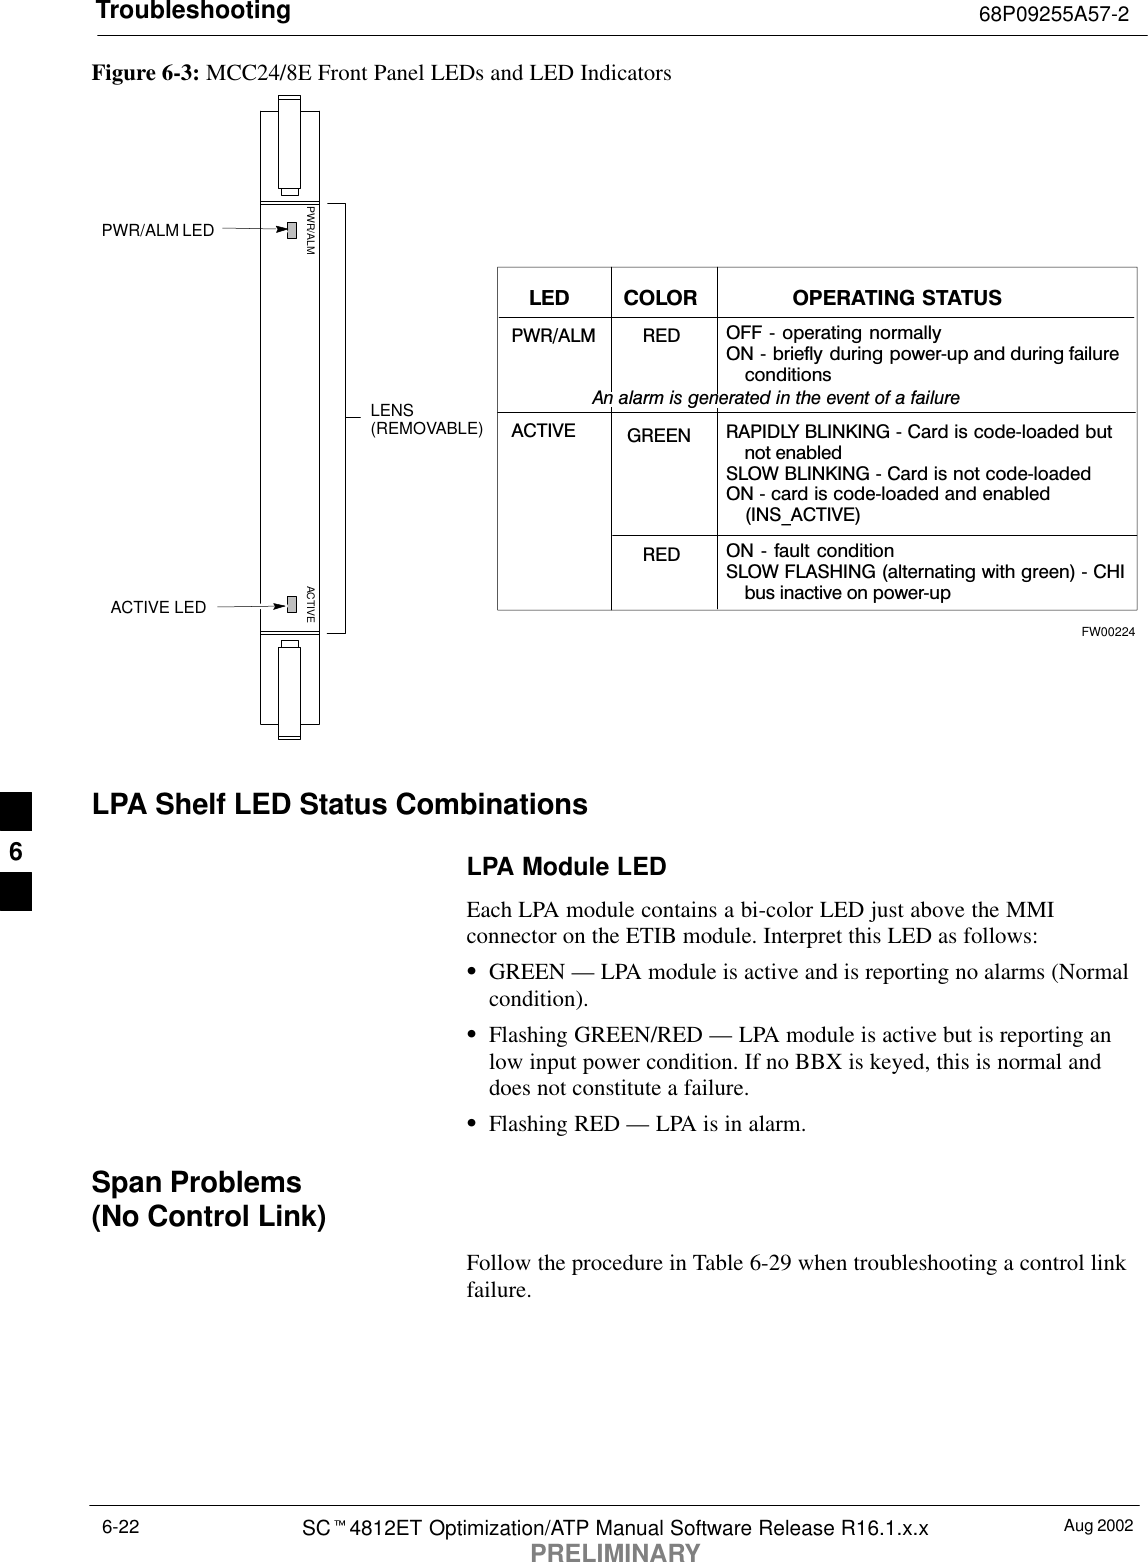 Troubleshooting 68P09255A57-2Aug 2002SCt4812ET Optimization/ATP Manual Software Release R16.1.x.xPRELIMINARY6-22Figure 6-3: MCC24/8E Front Panel LEDs and LED IndicatorsPWR/ALM LEDLENS(REMOVABLE)ACTIVE LEDPWR/ALM ACTIVEPWR/ALM OFF − operating normallyON − briefly during power−up and during failureconditionsACTIVELED OPERATING STATUSRAPIDLY BLINKING − Card is code−loaded butnot enabledSLOW BLINKING − Card is not code−loadedON − card is code−loaded and enabled(INS_ACTIVE)COLORGREENREDRED ON − fault conditionSLOW FLASHING (alternating with green) − CHIbus inactive on power−upAn alarm is generated in the event of a failureFW00224LPA Shelf LED Status CombinationsLPA Module LEDEach LPA module contains a bi-color LED just above the MMIconnector on the ETIB module. Interpret this LED as follows:SGREEN — LPA module is active and is reporting no alarms (Normalcondition).SFlashing GREEN/RED — LPA module is active but is reporting anlow input power condition. If no BBX is keyed, this is normal anddoes not constitute a failure.SFlashing RED — LPA is in alarm.Span Problems(No Control Link)Follow the procedure in Table 6-29 when troubleshooting a control linkfailure.6